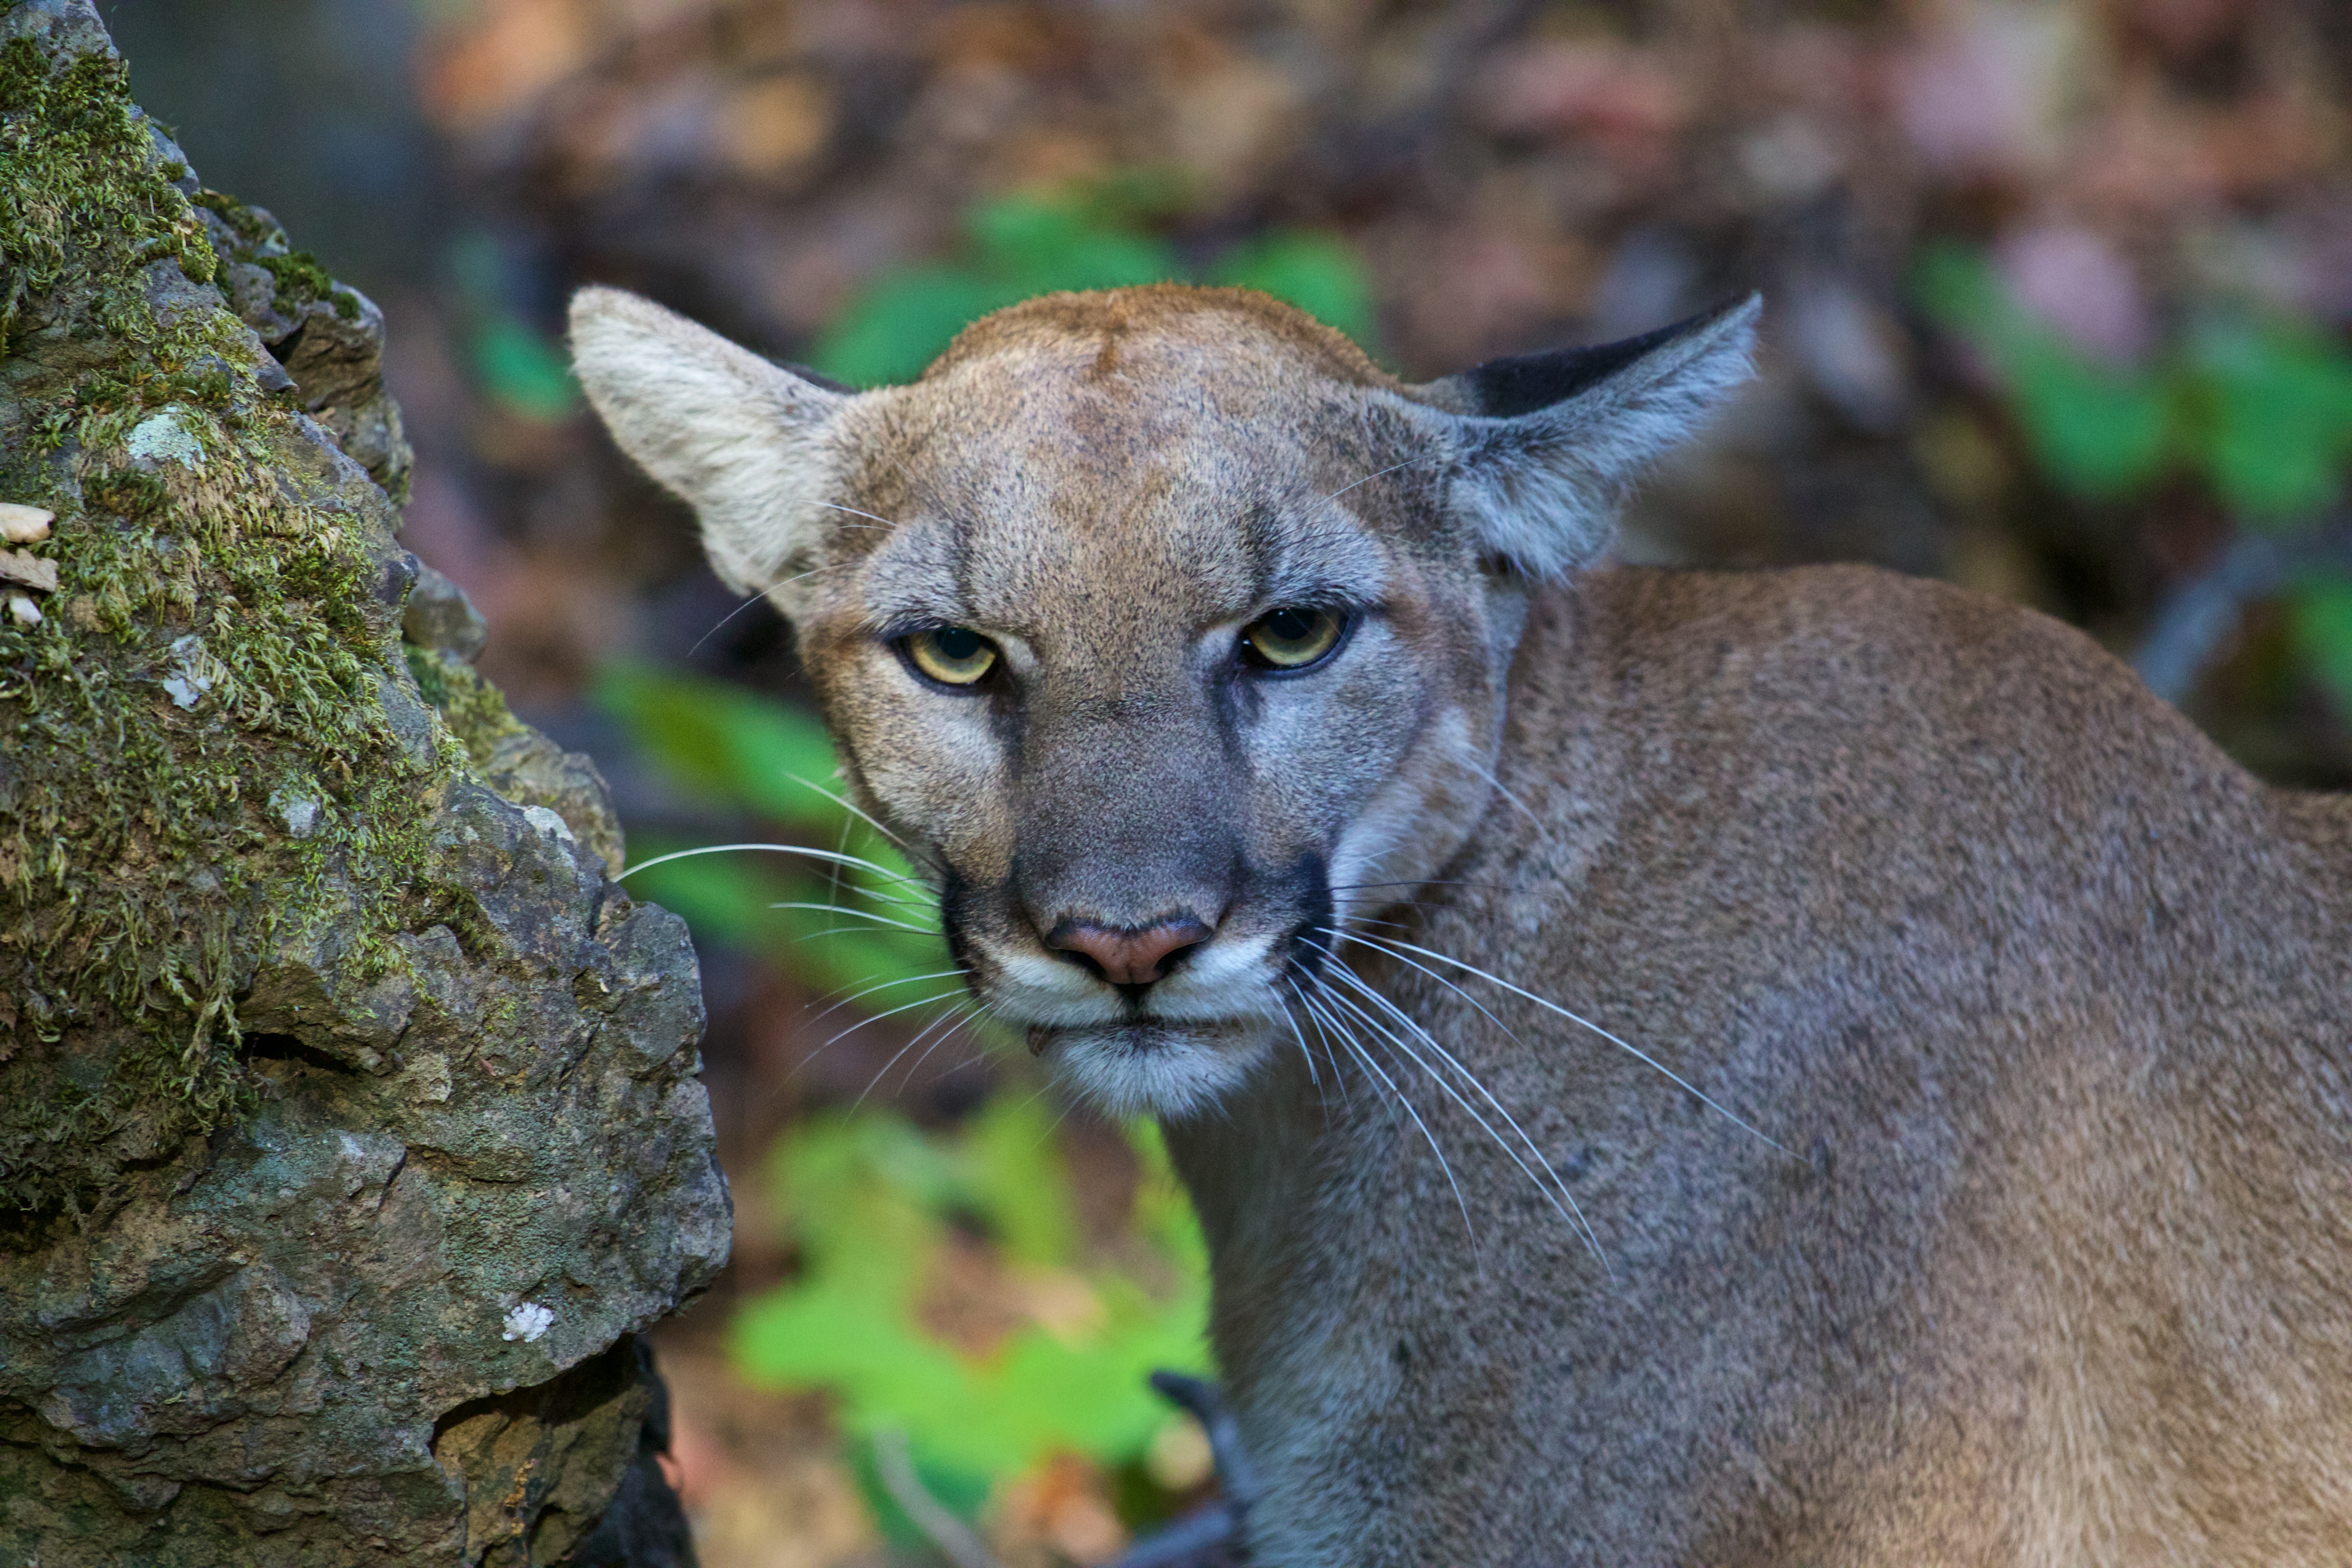 Analysis of first 15 years of mountain lion locations reveals they thrive  in shrublands and rarely enter residential areas - Santa Monica Mountains  National Recreation Area (. National Park Service)